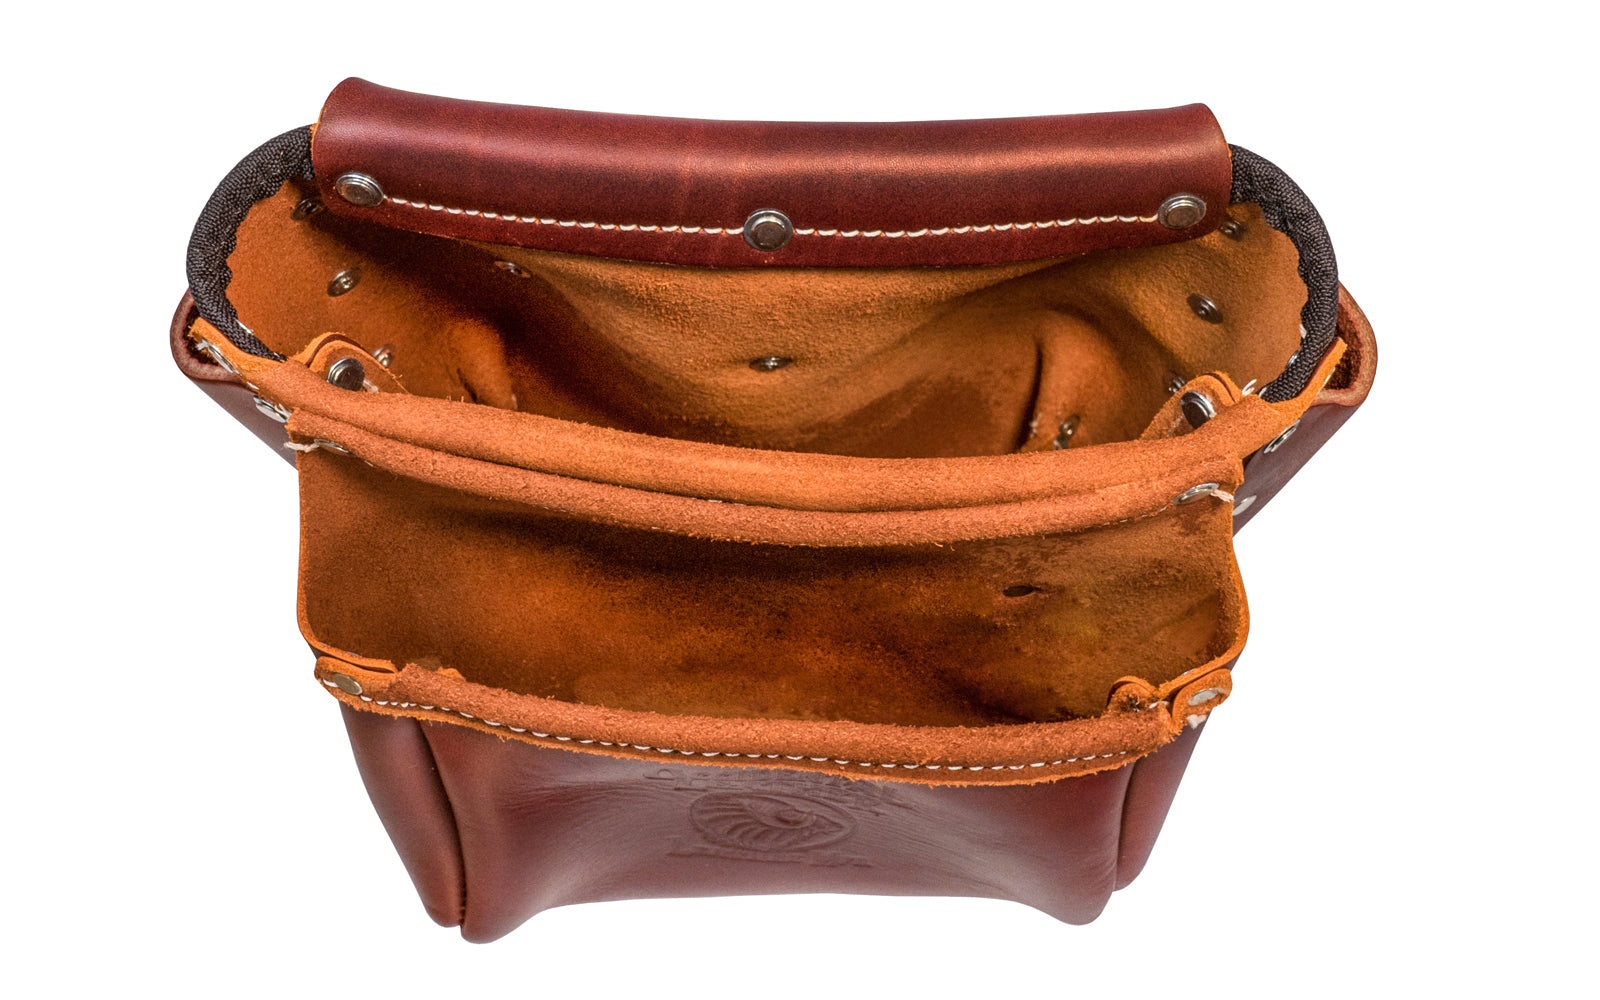 Occidental Leather Iron Worker's Bolt Bag ~ 9922 - Genuine leather - Made in USA - 759244293708 - Occidental Leather's "Pro Leather" construction bolt bag with bull-pin loop on each side. Tunnel loop on back accepts up to 3" work belt. Iron Worker's Leather Bolt Bag - Two Pouch Tool Bag - Double Pouch Bag